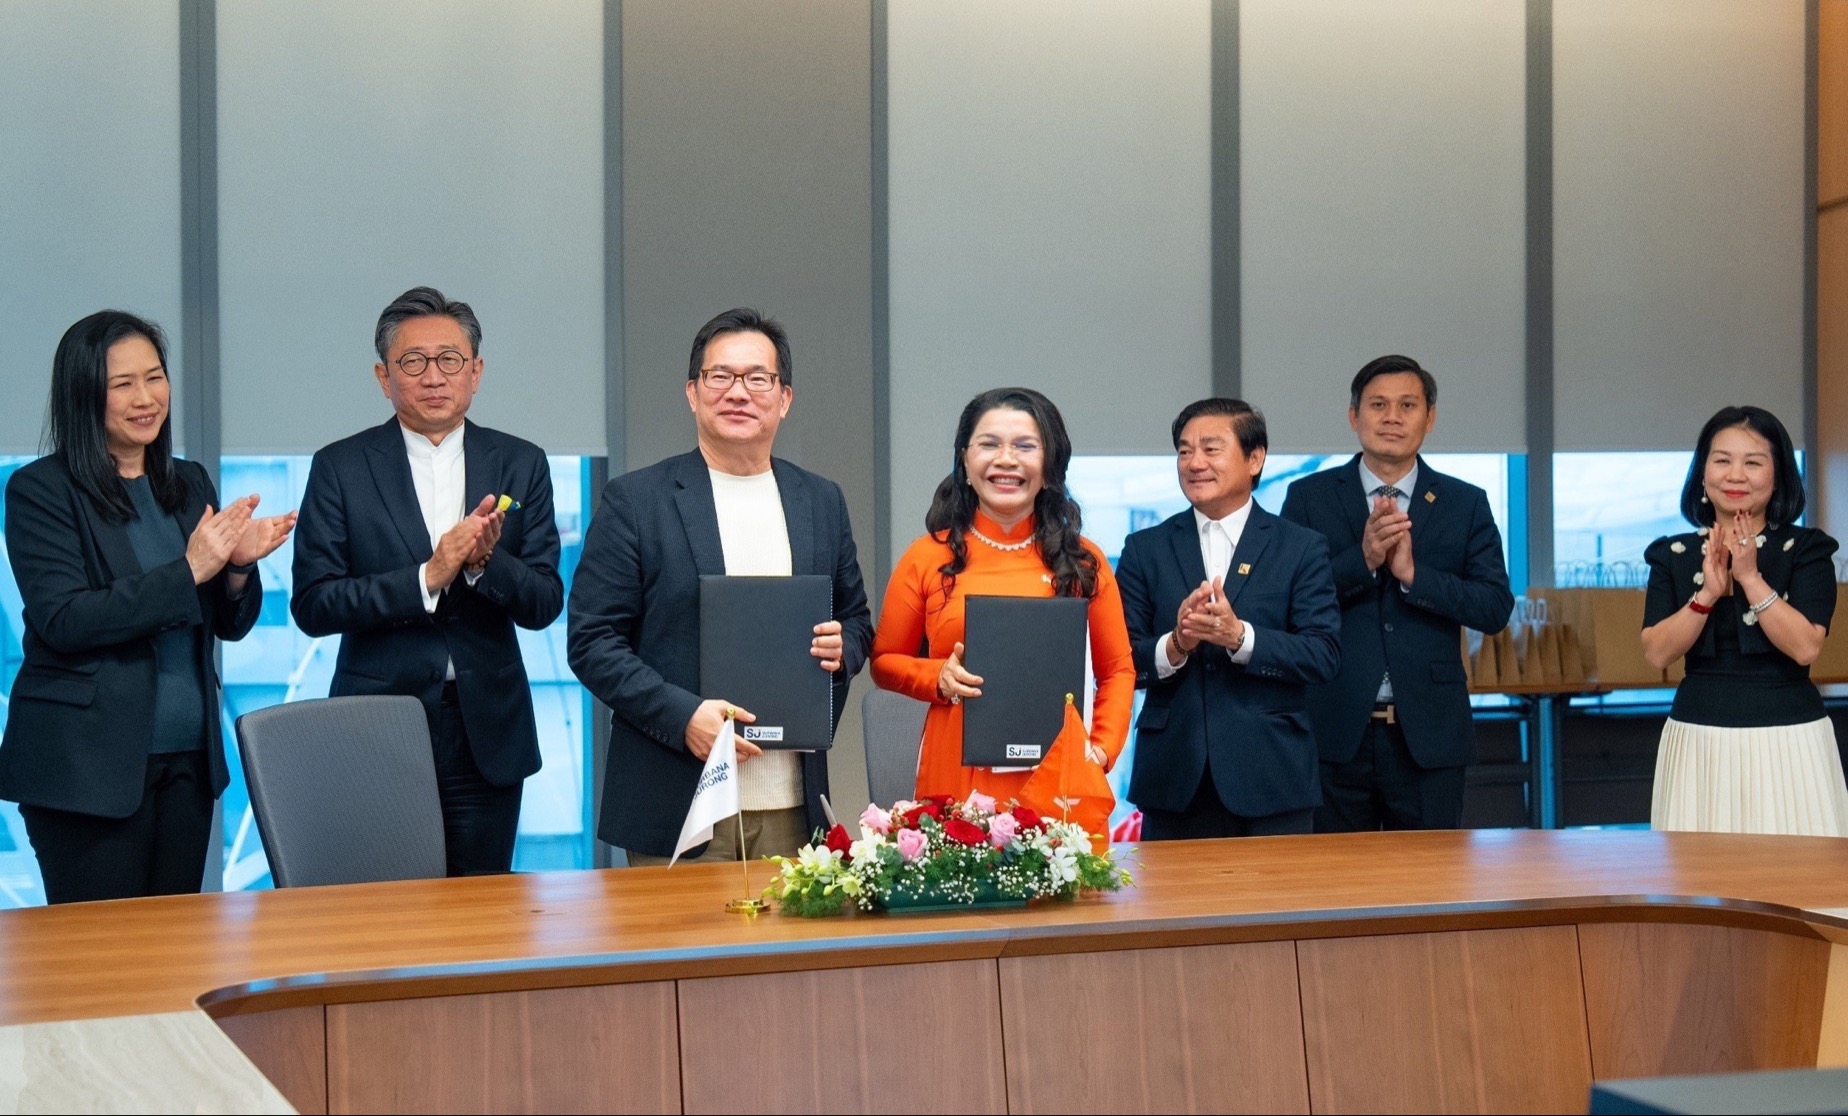 Signing ceremony of strategic cooperation between Surbana Jurong and Kim Oanh Group